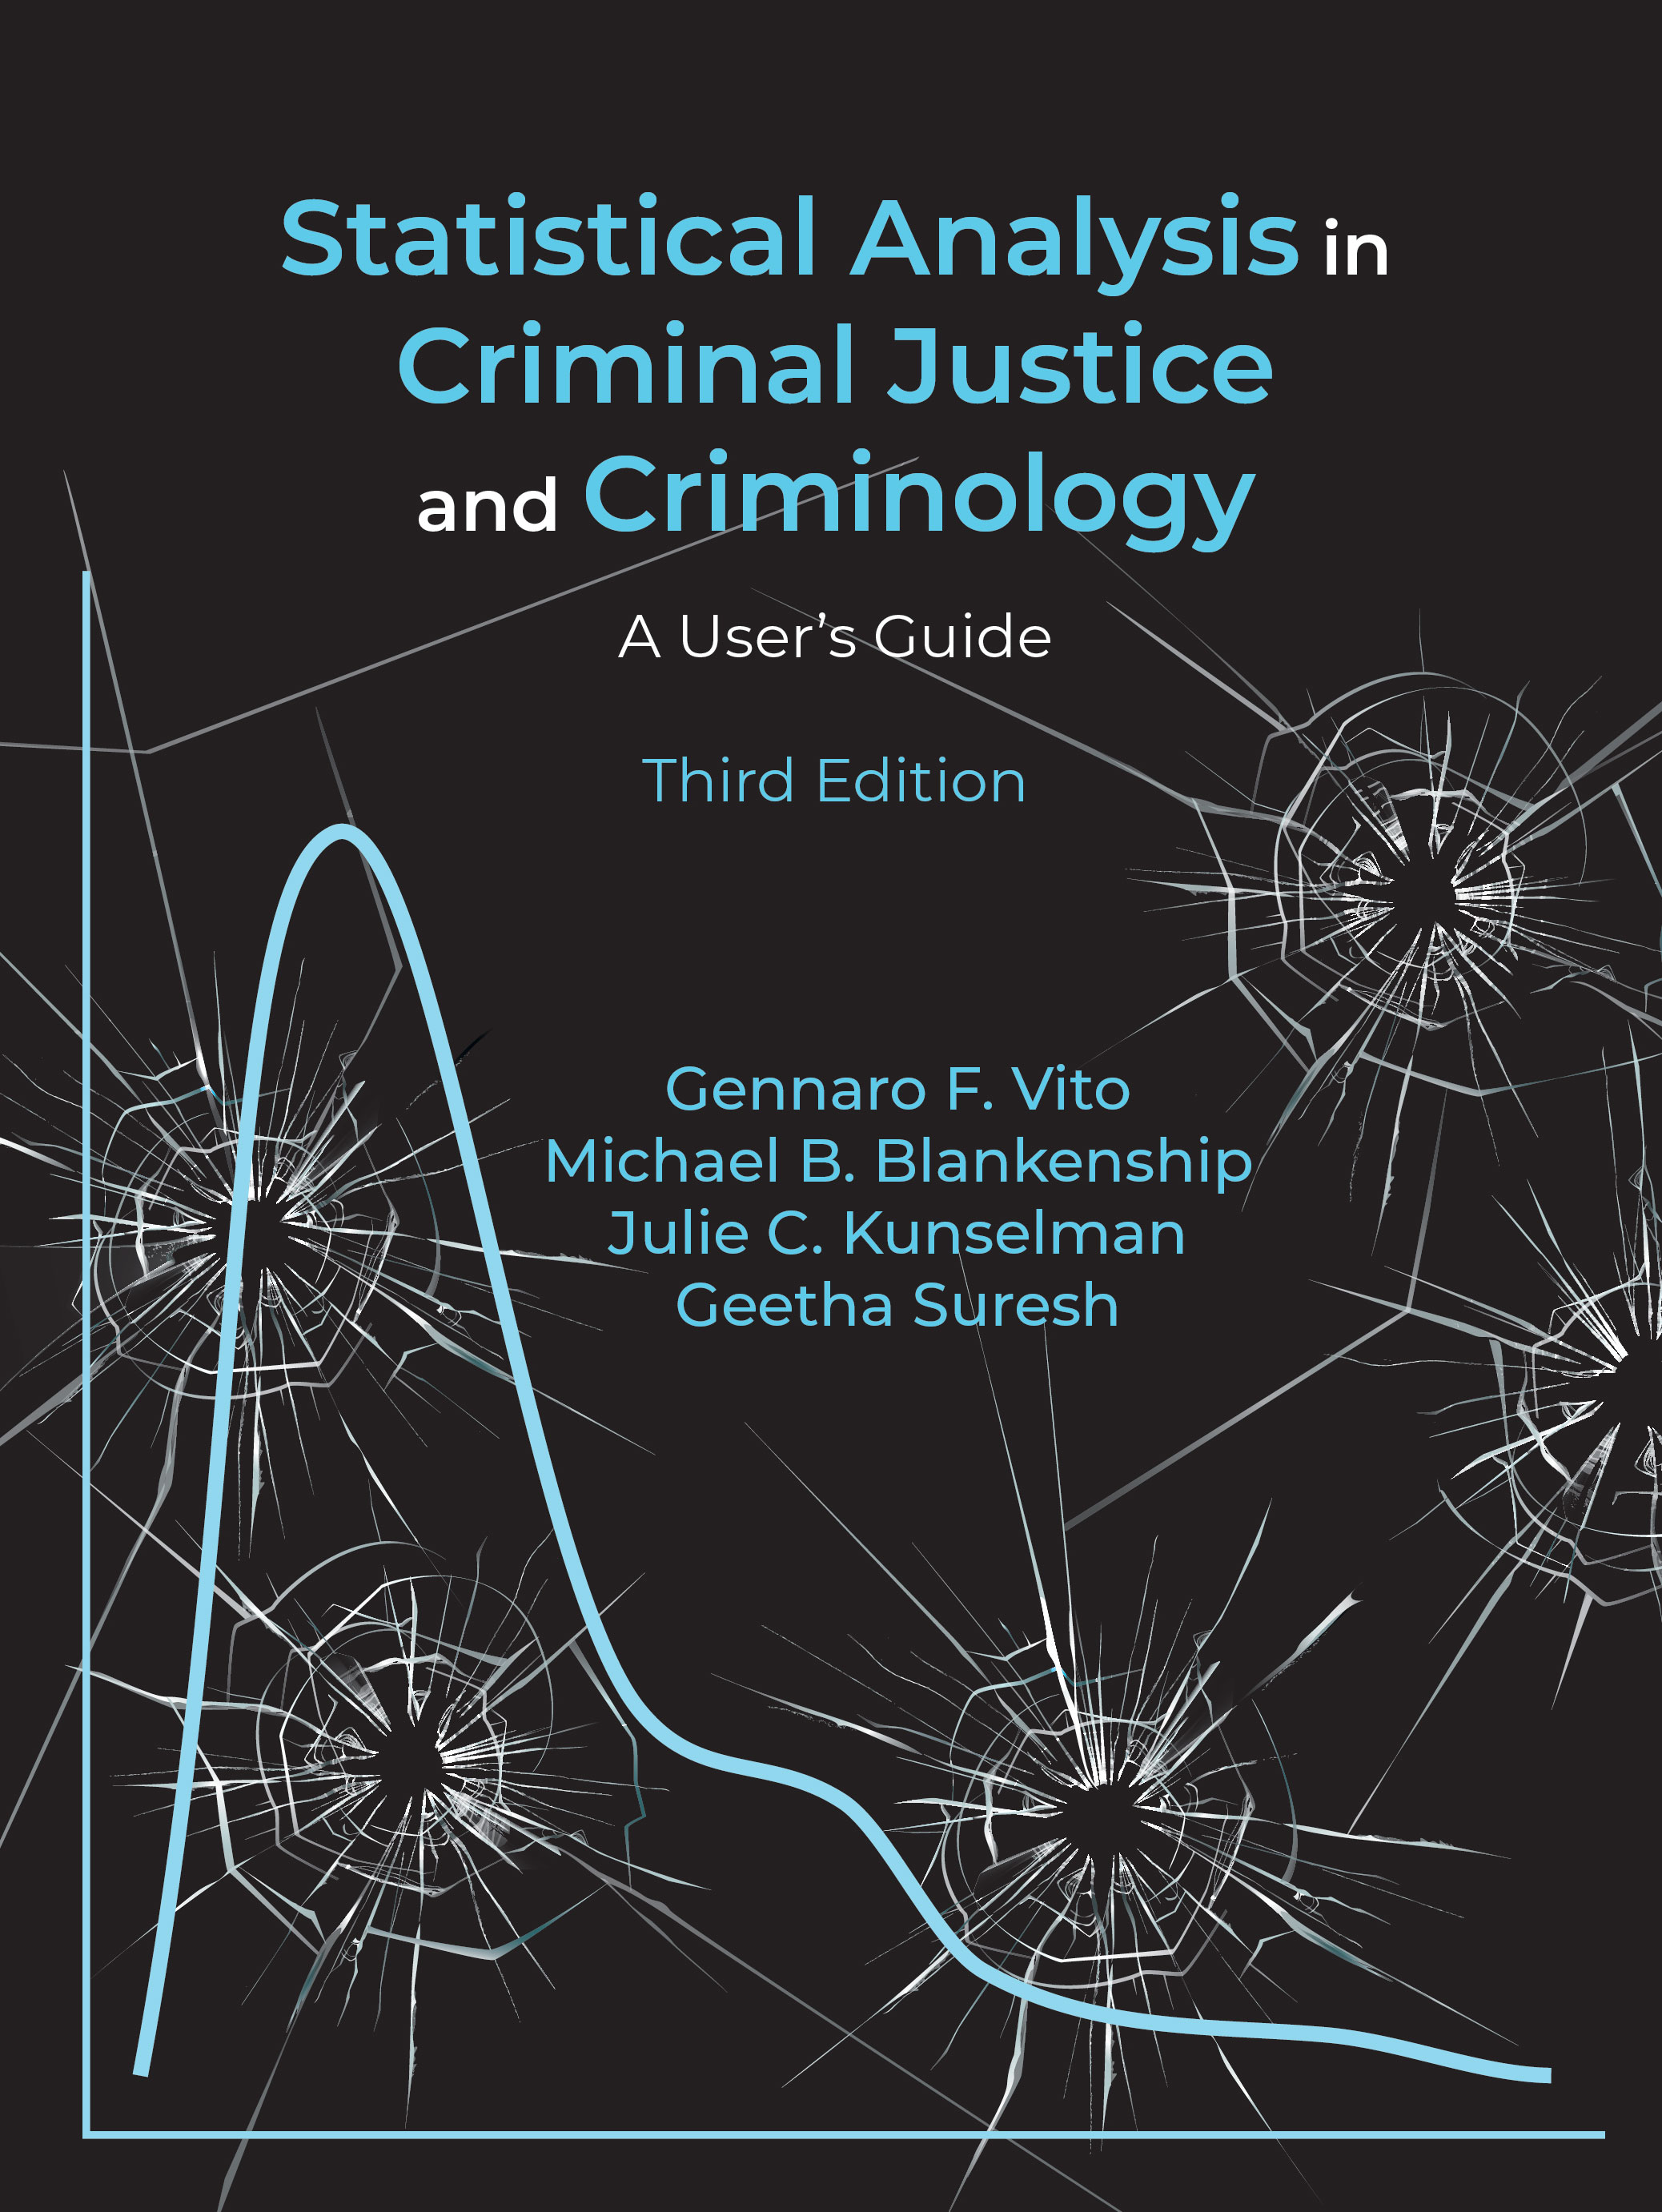 Statistical Analysis in Criminal Justice and Criminology: A User